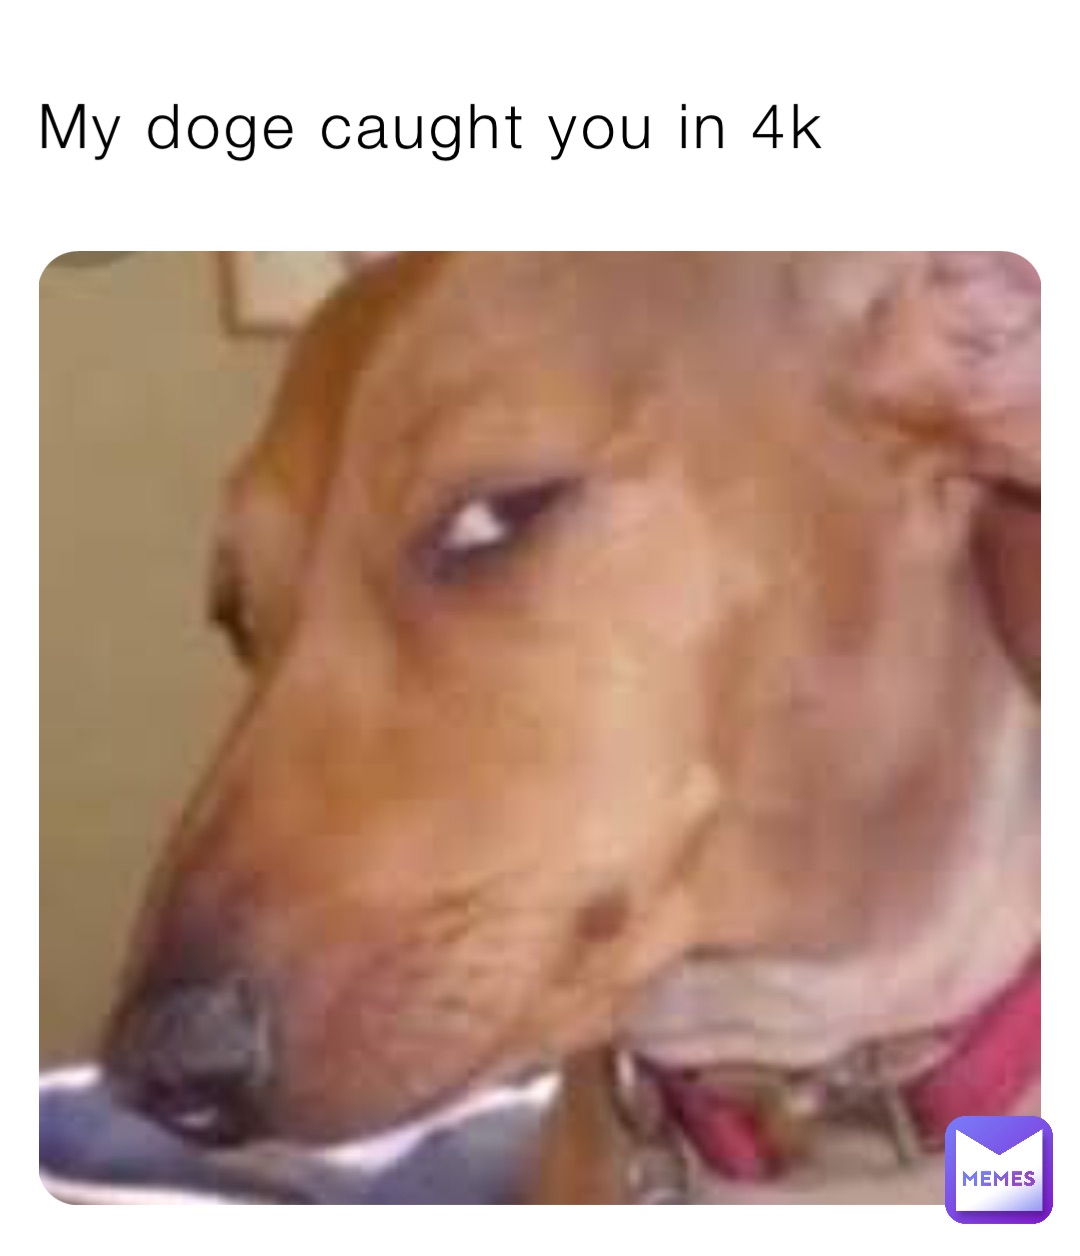 My doge caught you in 4k